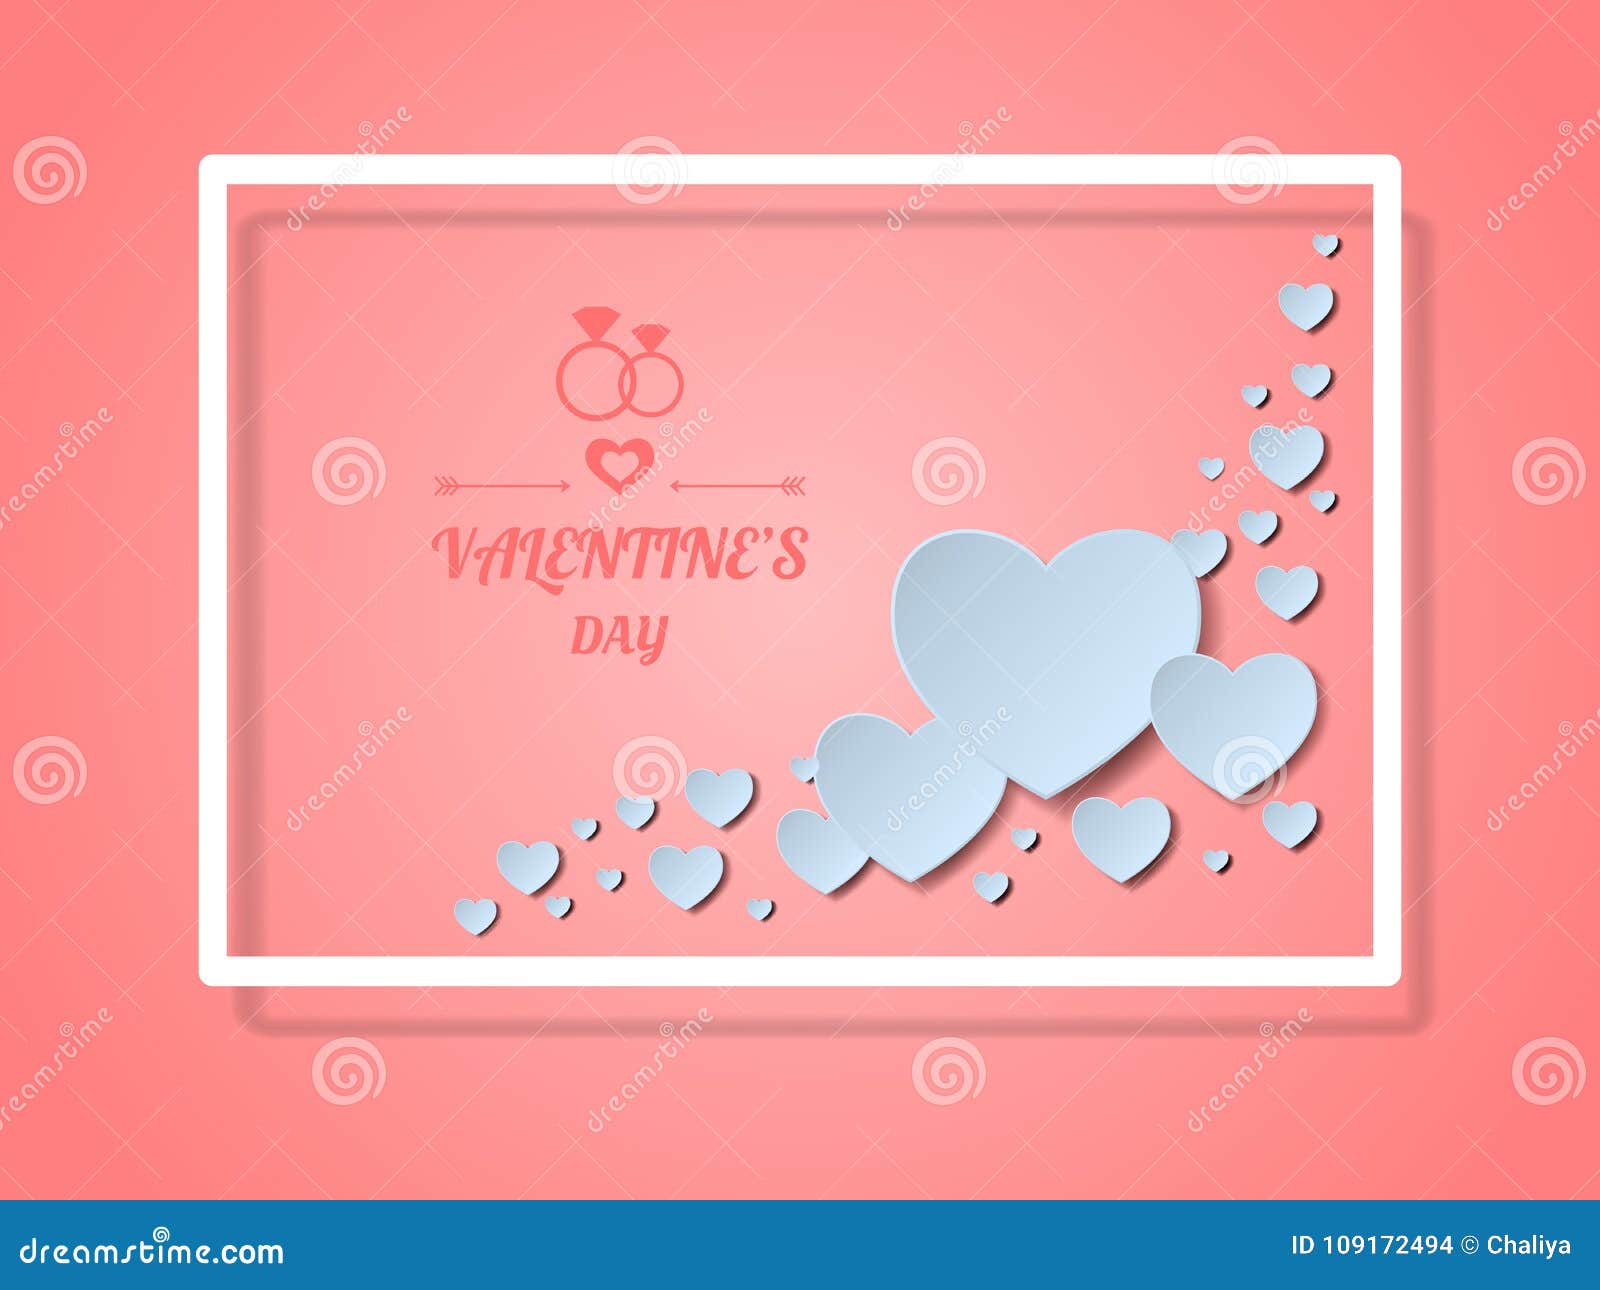 Happy Valentines Day Concept of Love. Paper Art Heart Shape in Square  Frame. Paper Art Design Stock Vector - Illustration of space, graphic:  109172494